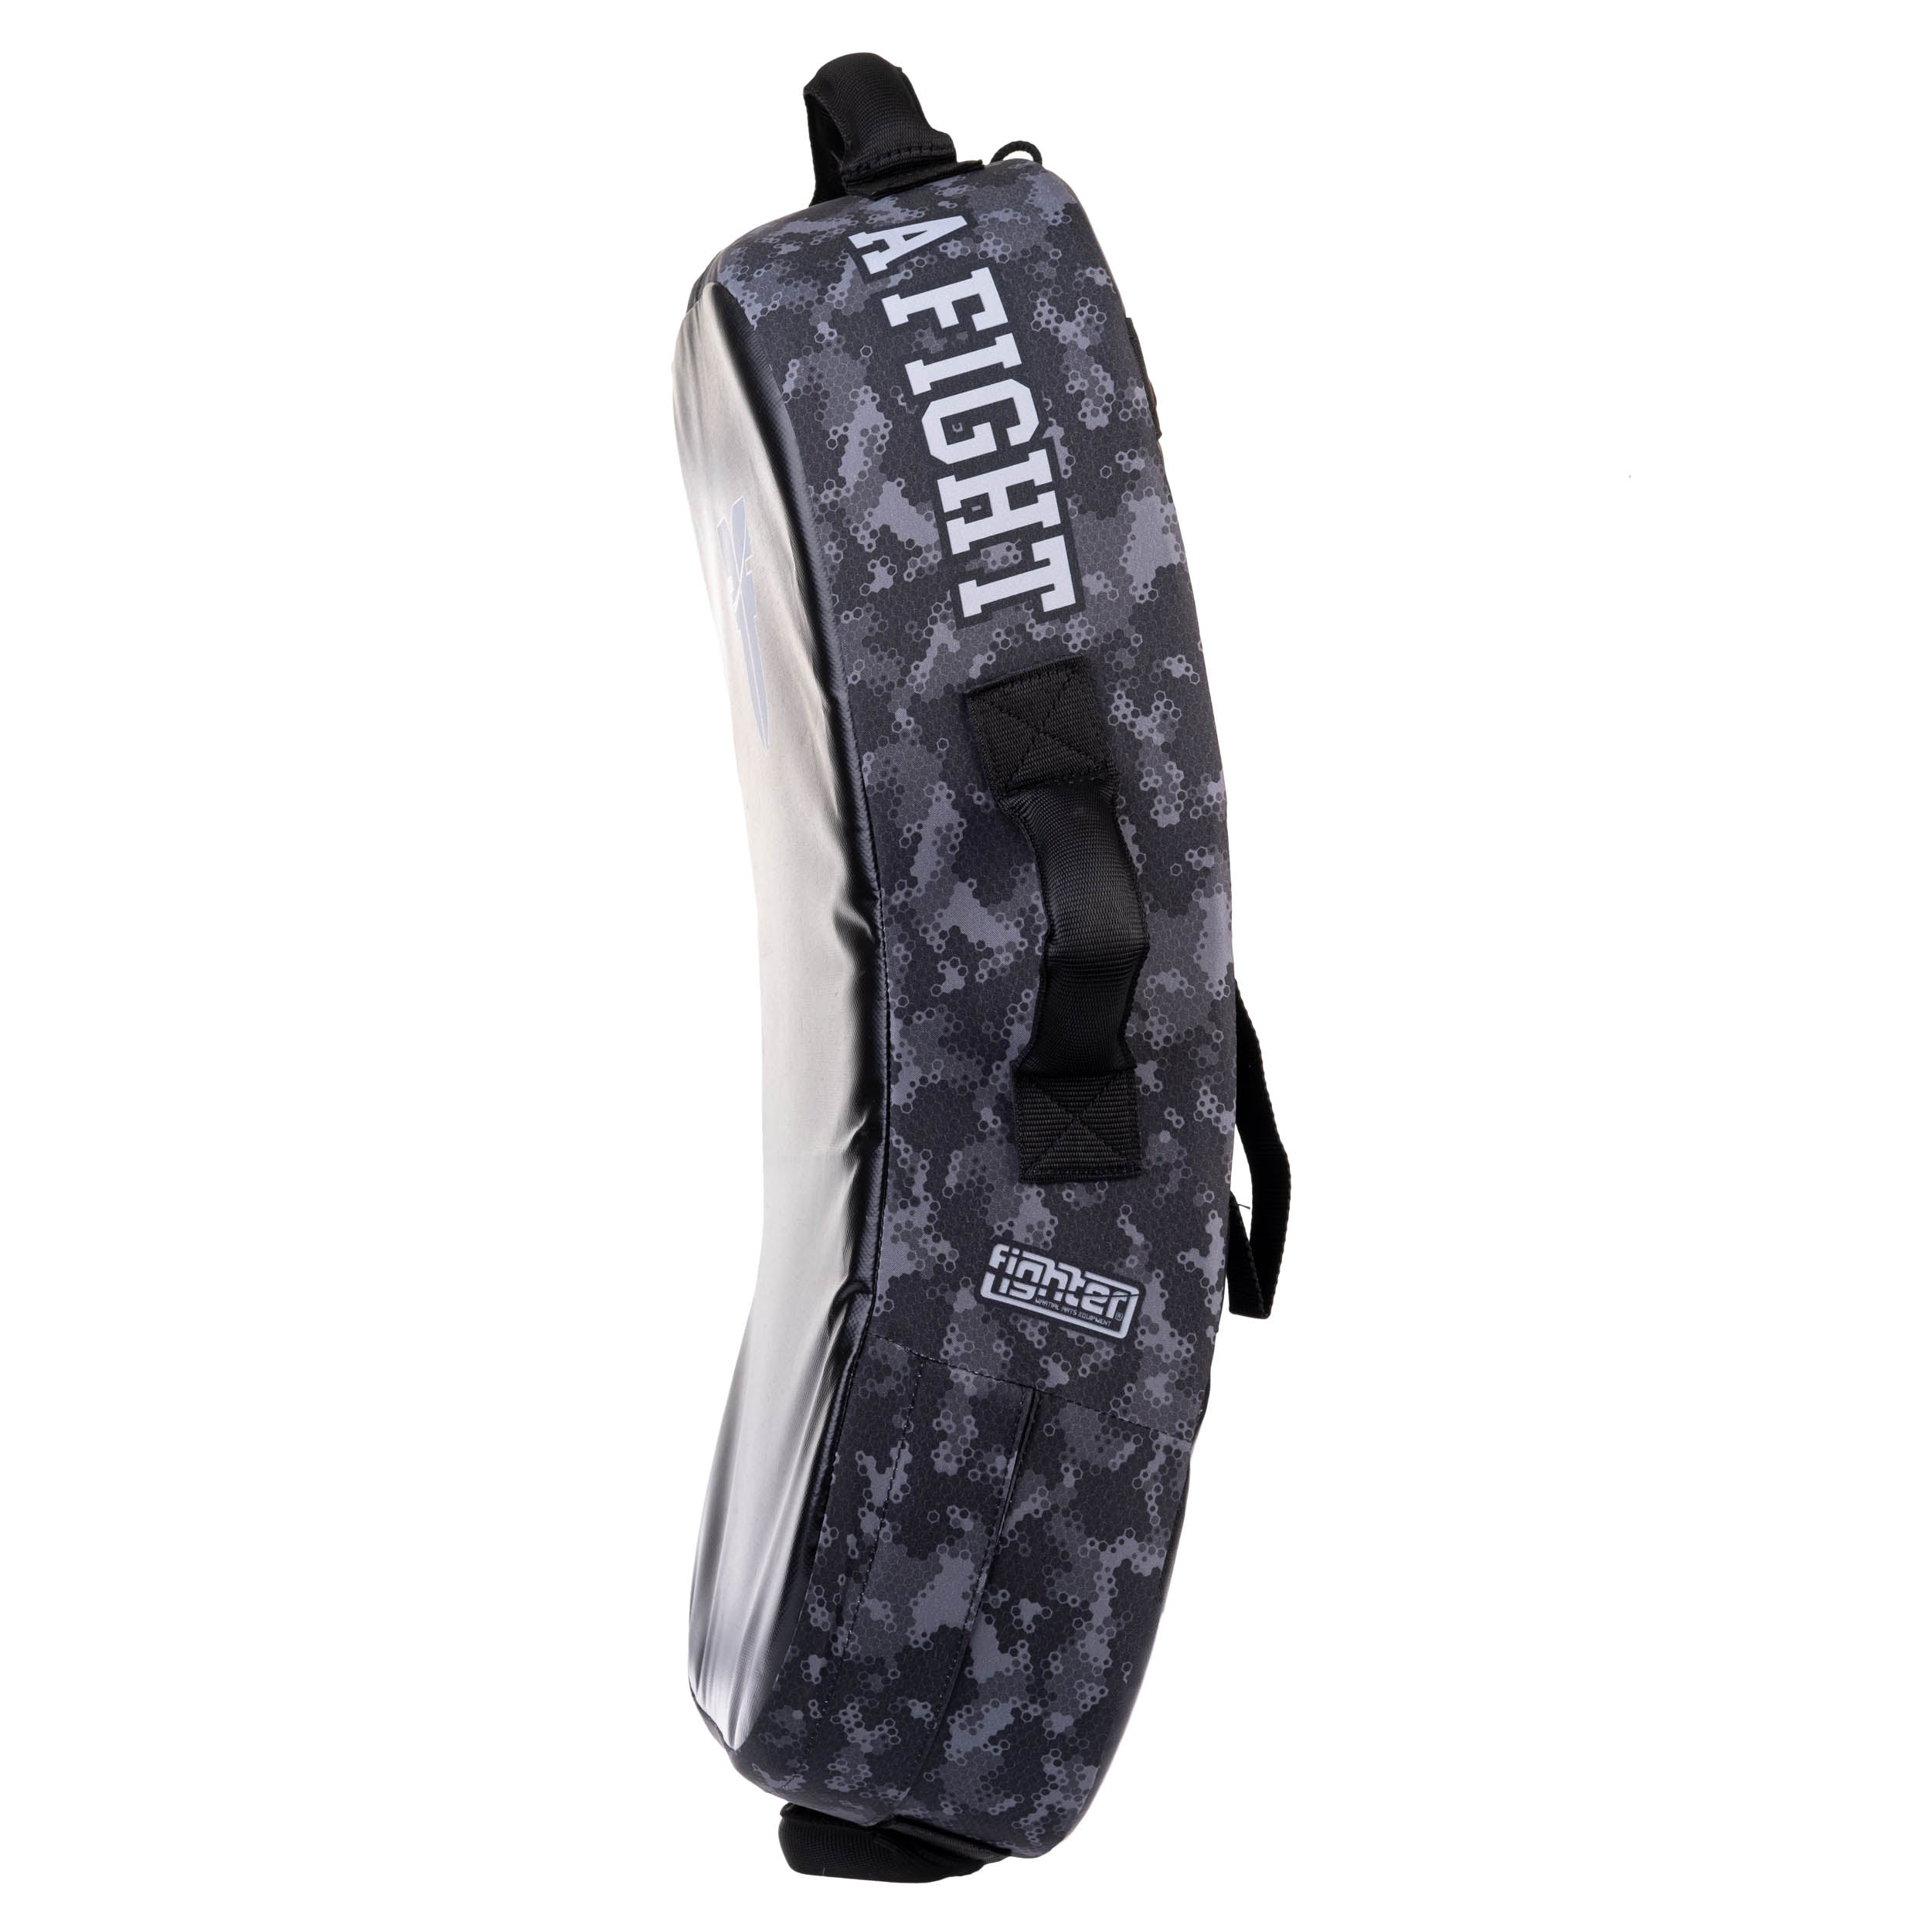 Fighter Kicking Shield - MULTI GRIP - Life is a Fight - Gray Camo, FKSH-29